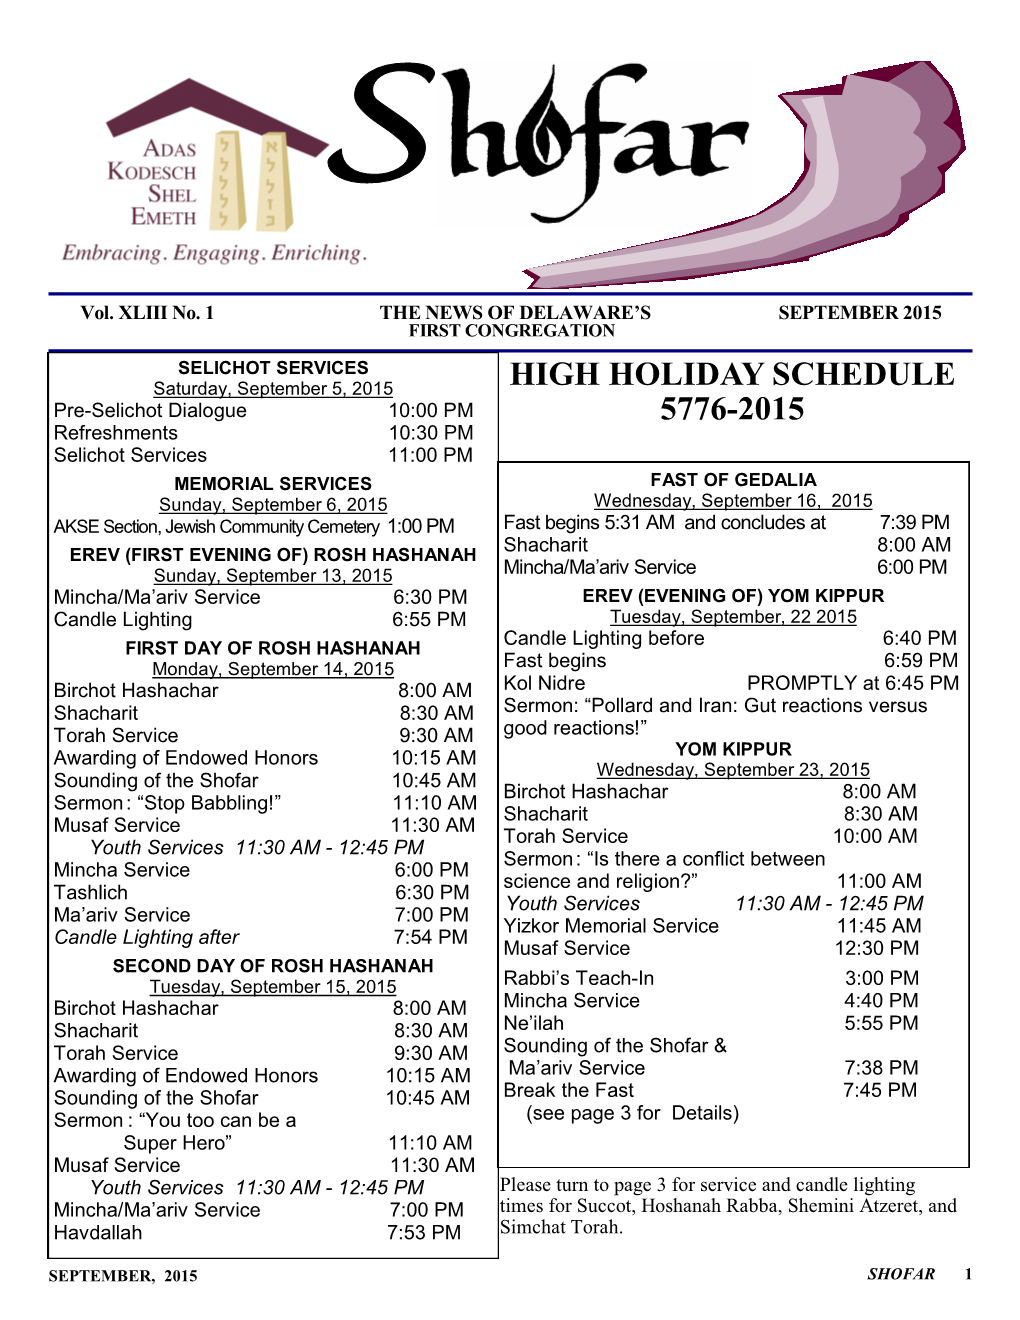 High Holiday Schedule 5776-2015